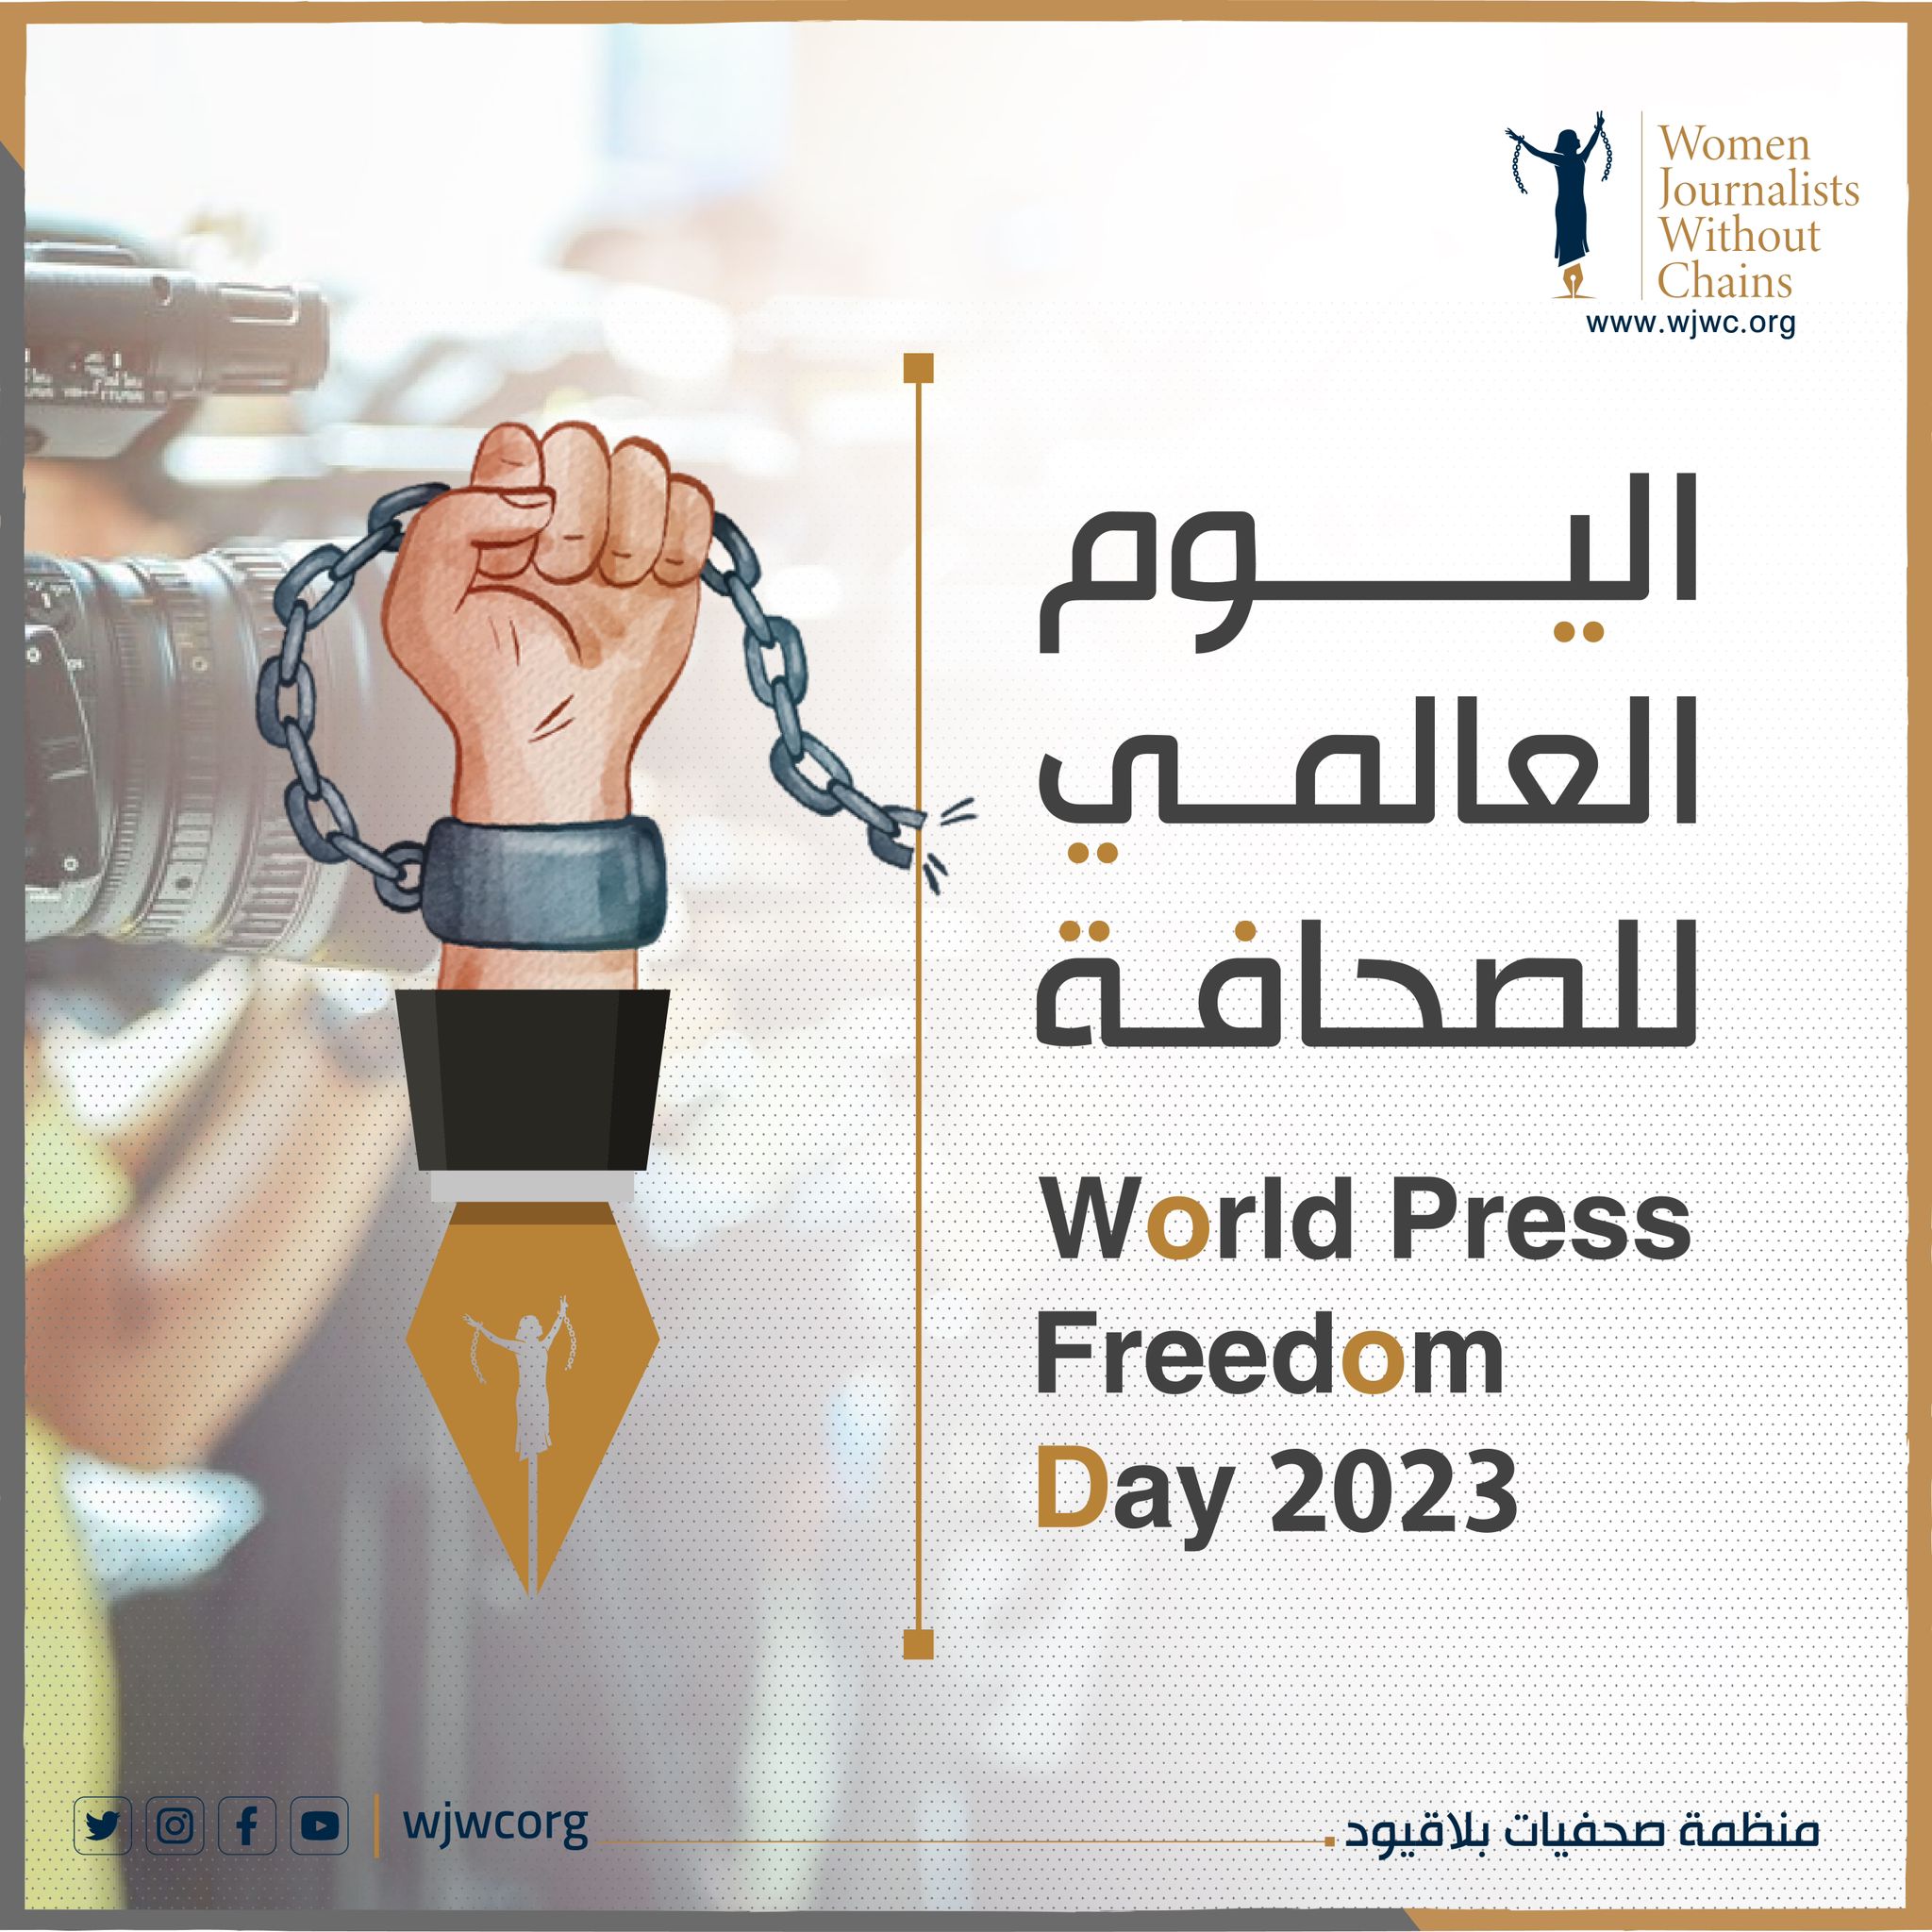 High Price of Truth: Challenges Facing Journalists in MENA